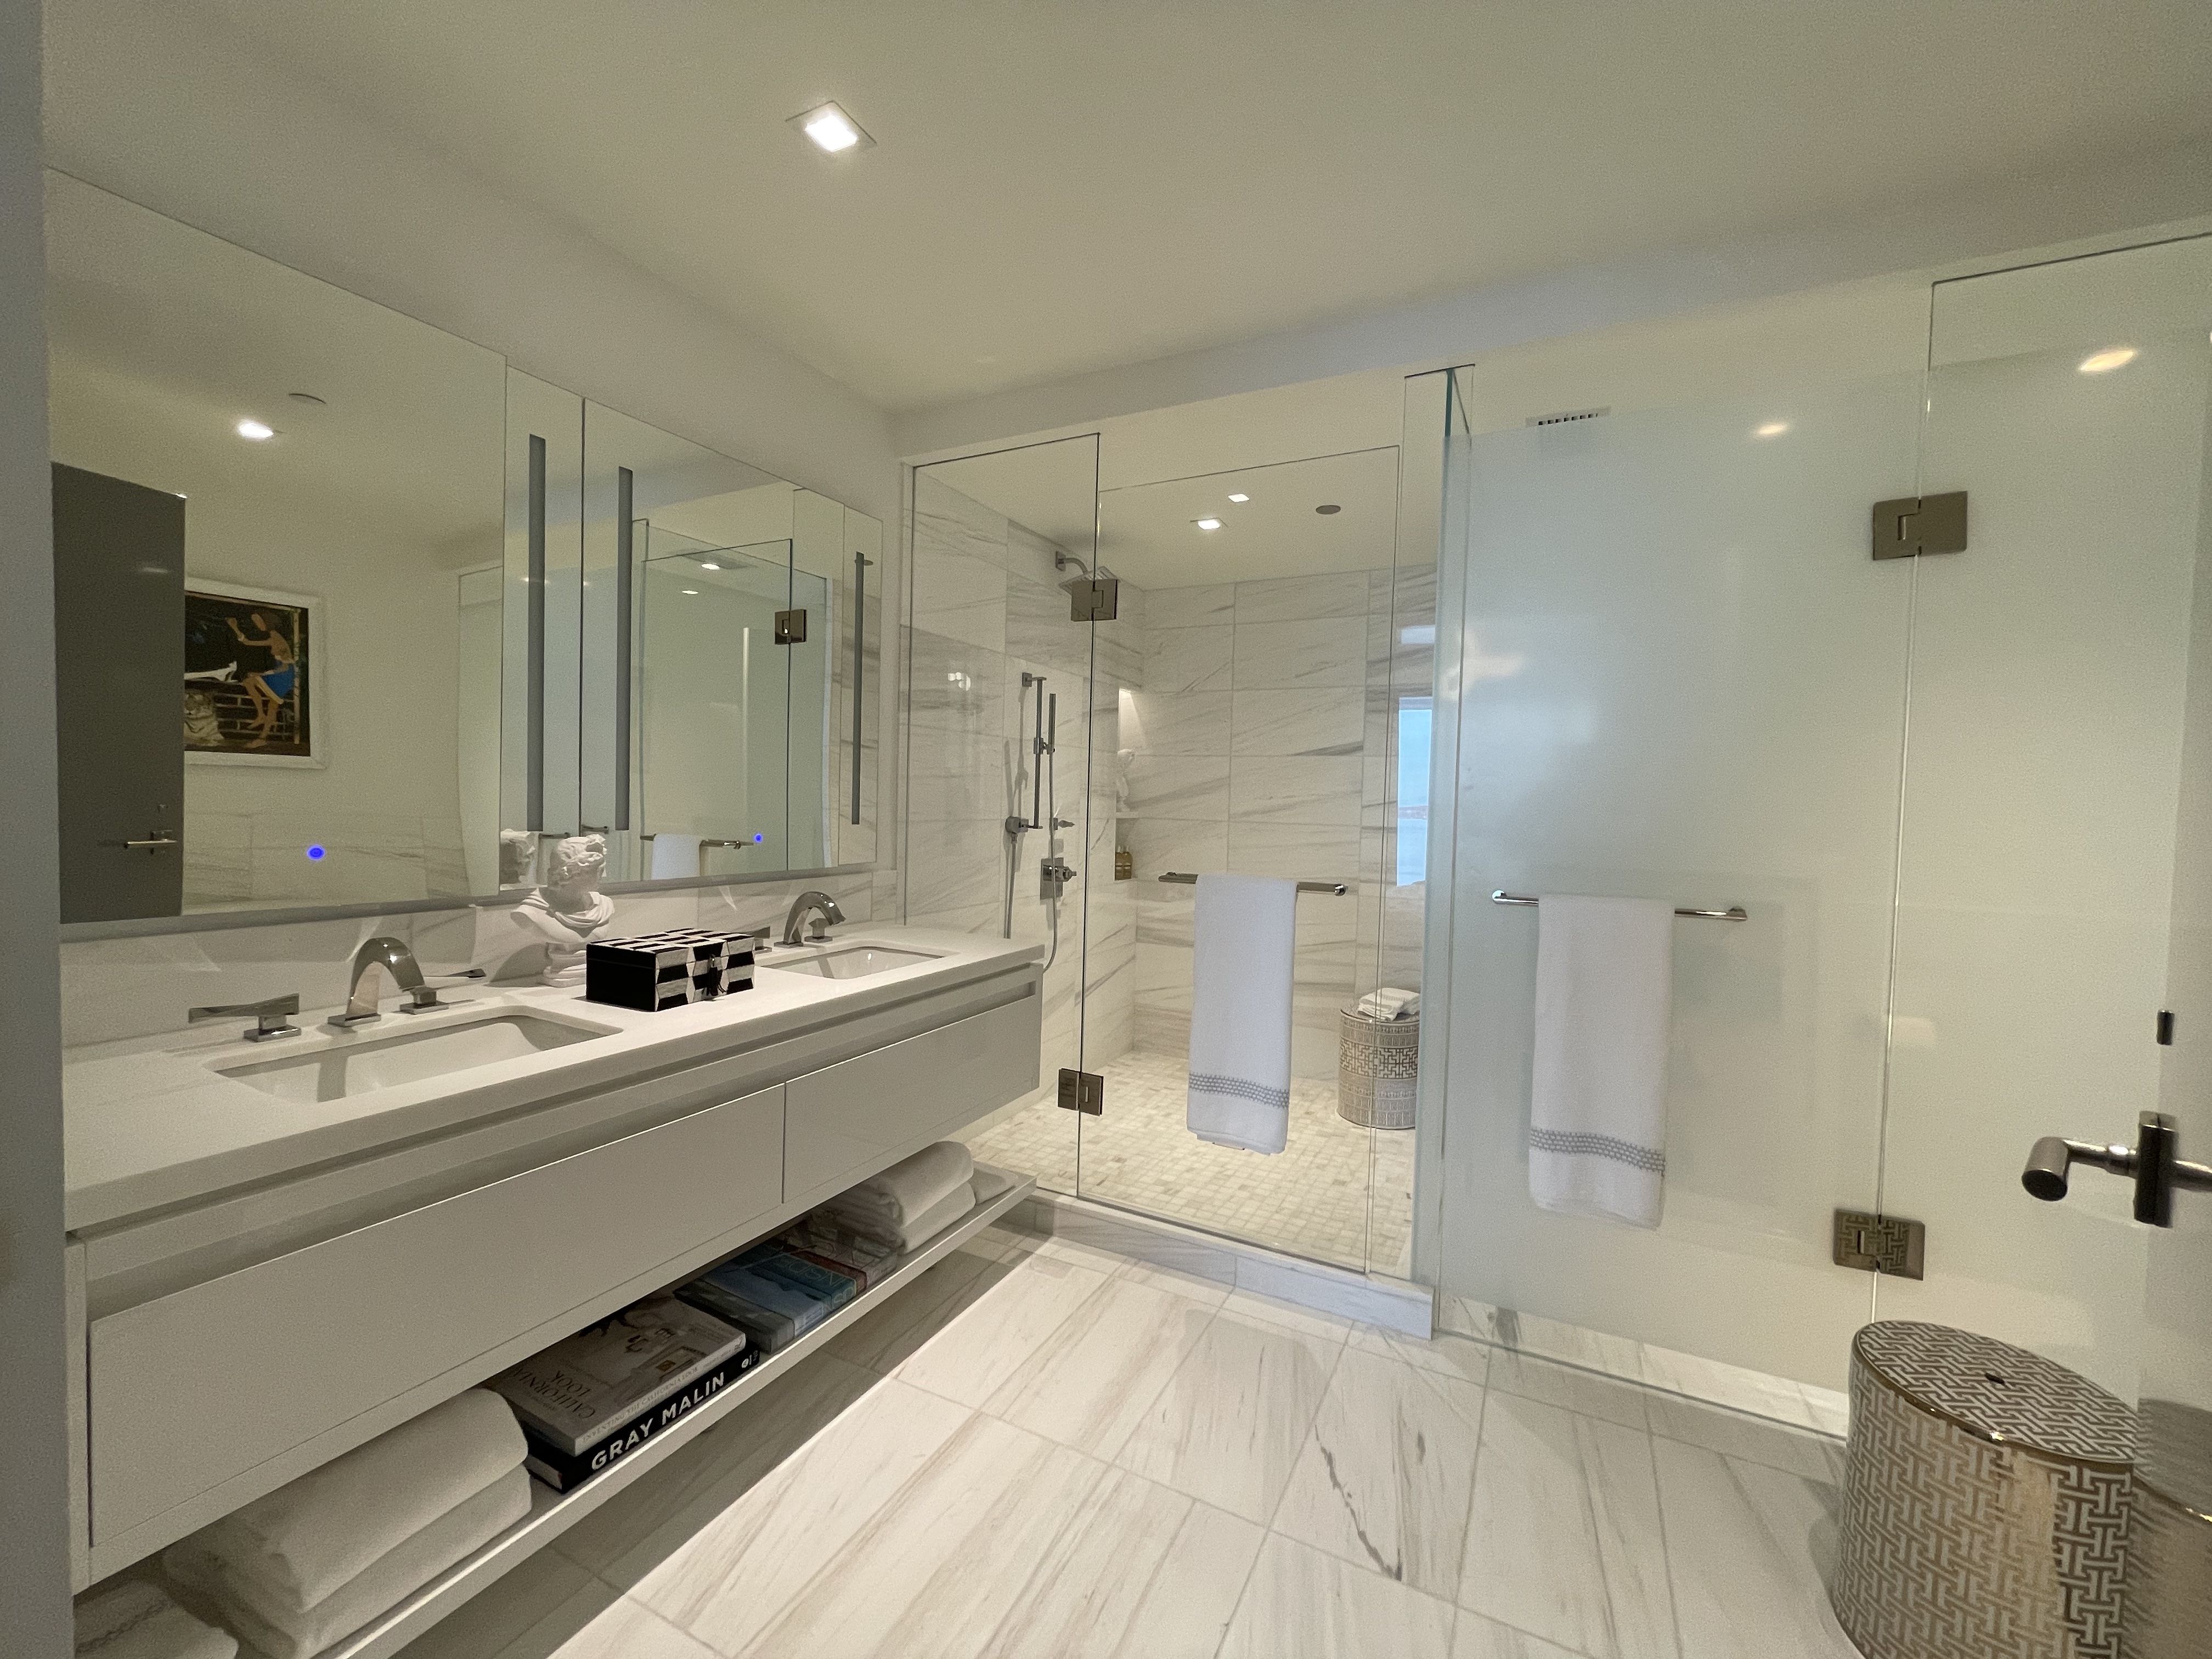 The master bath has a large counter, a shower, an obscured toilet area. Not pictured is a bathtub to the right.